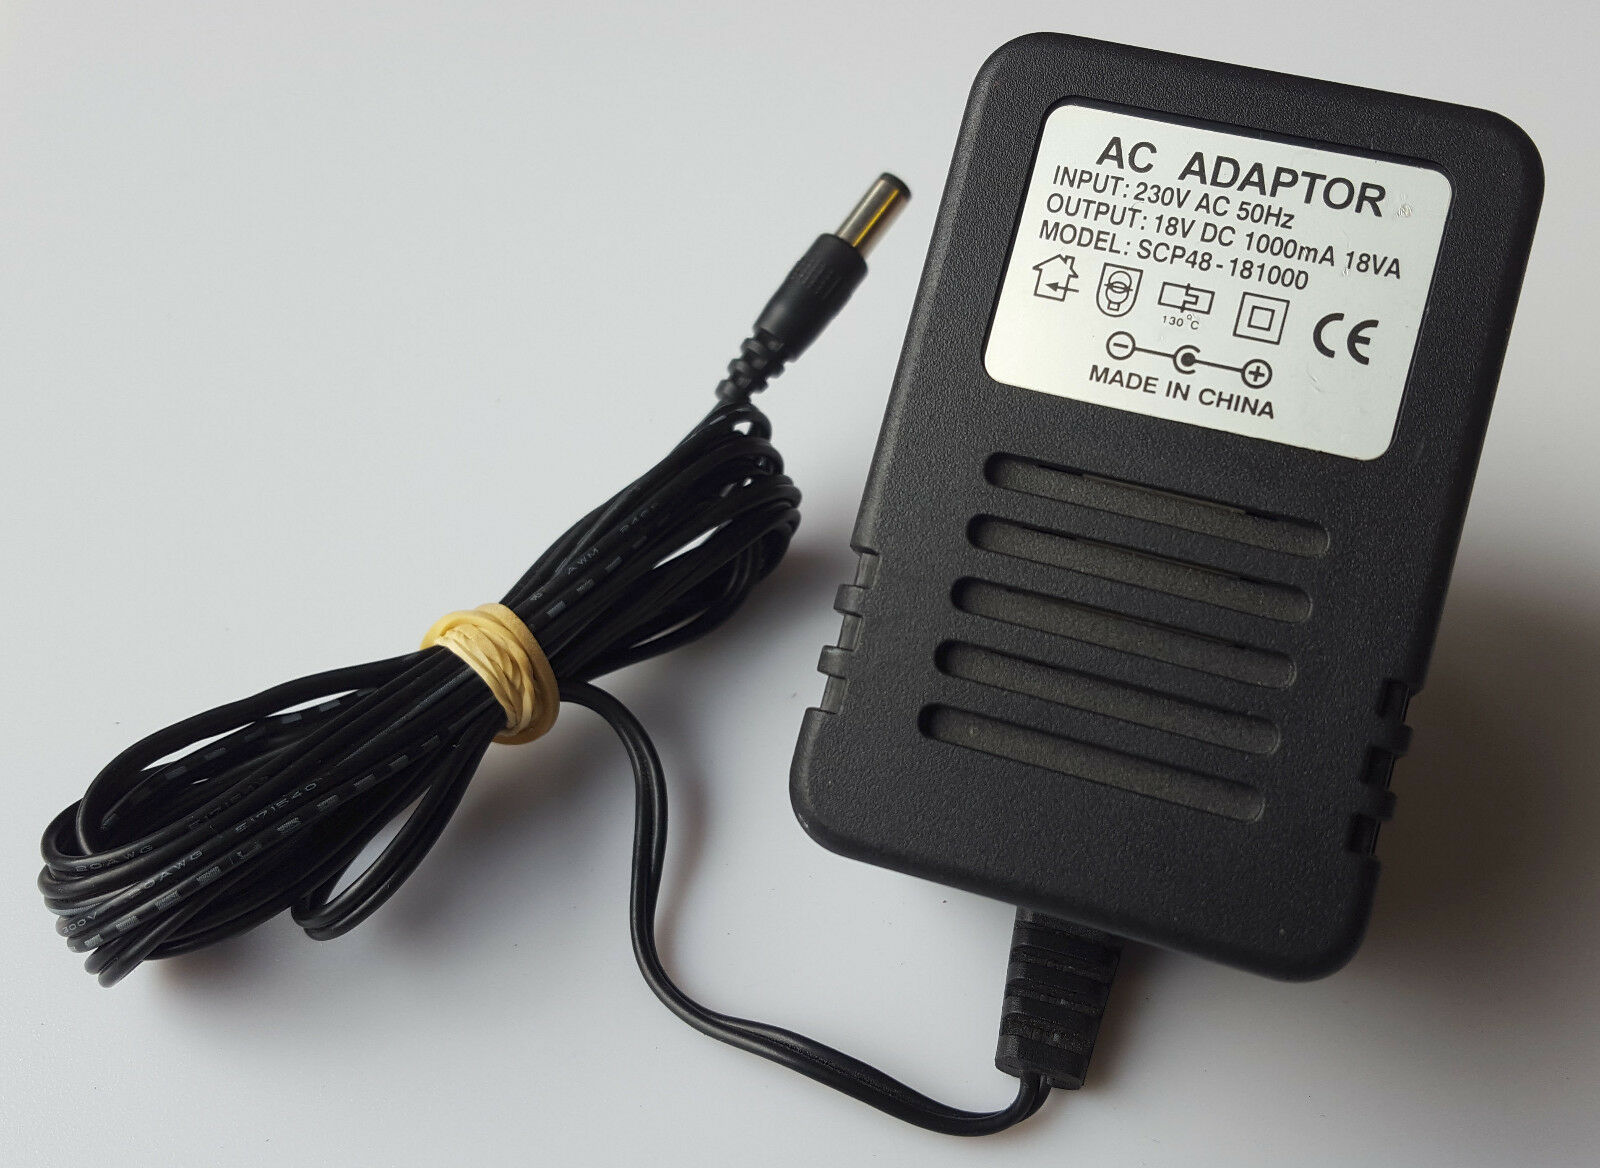 New SCP48-181000 AC/DC POWER SUPPLY ADAPTER 18V 1.0A